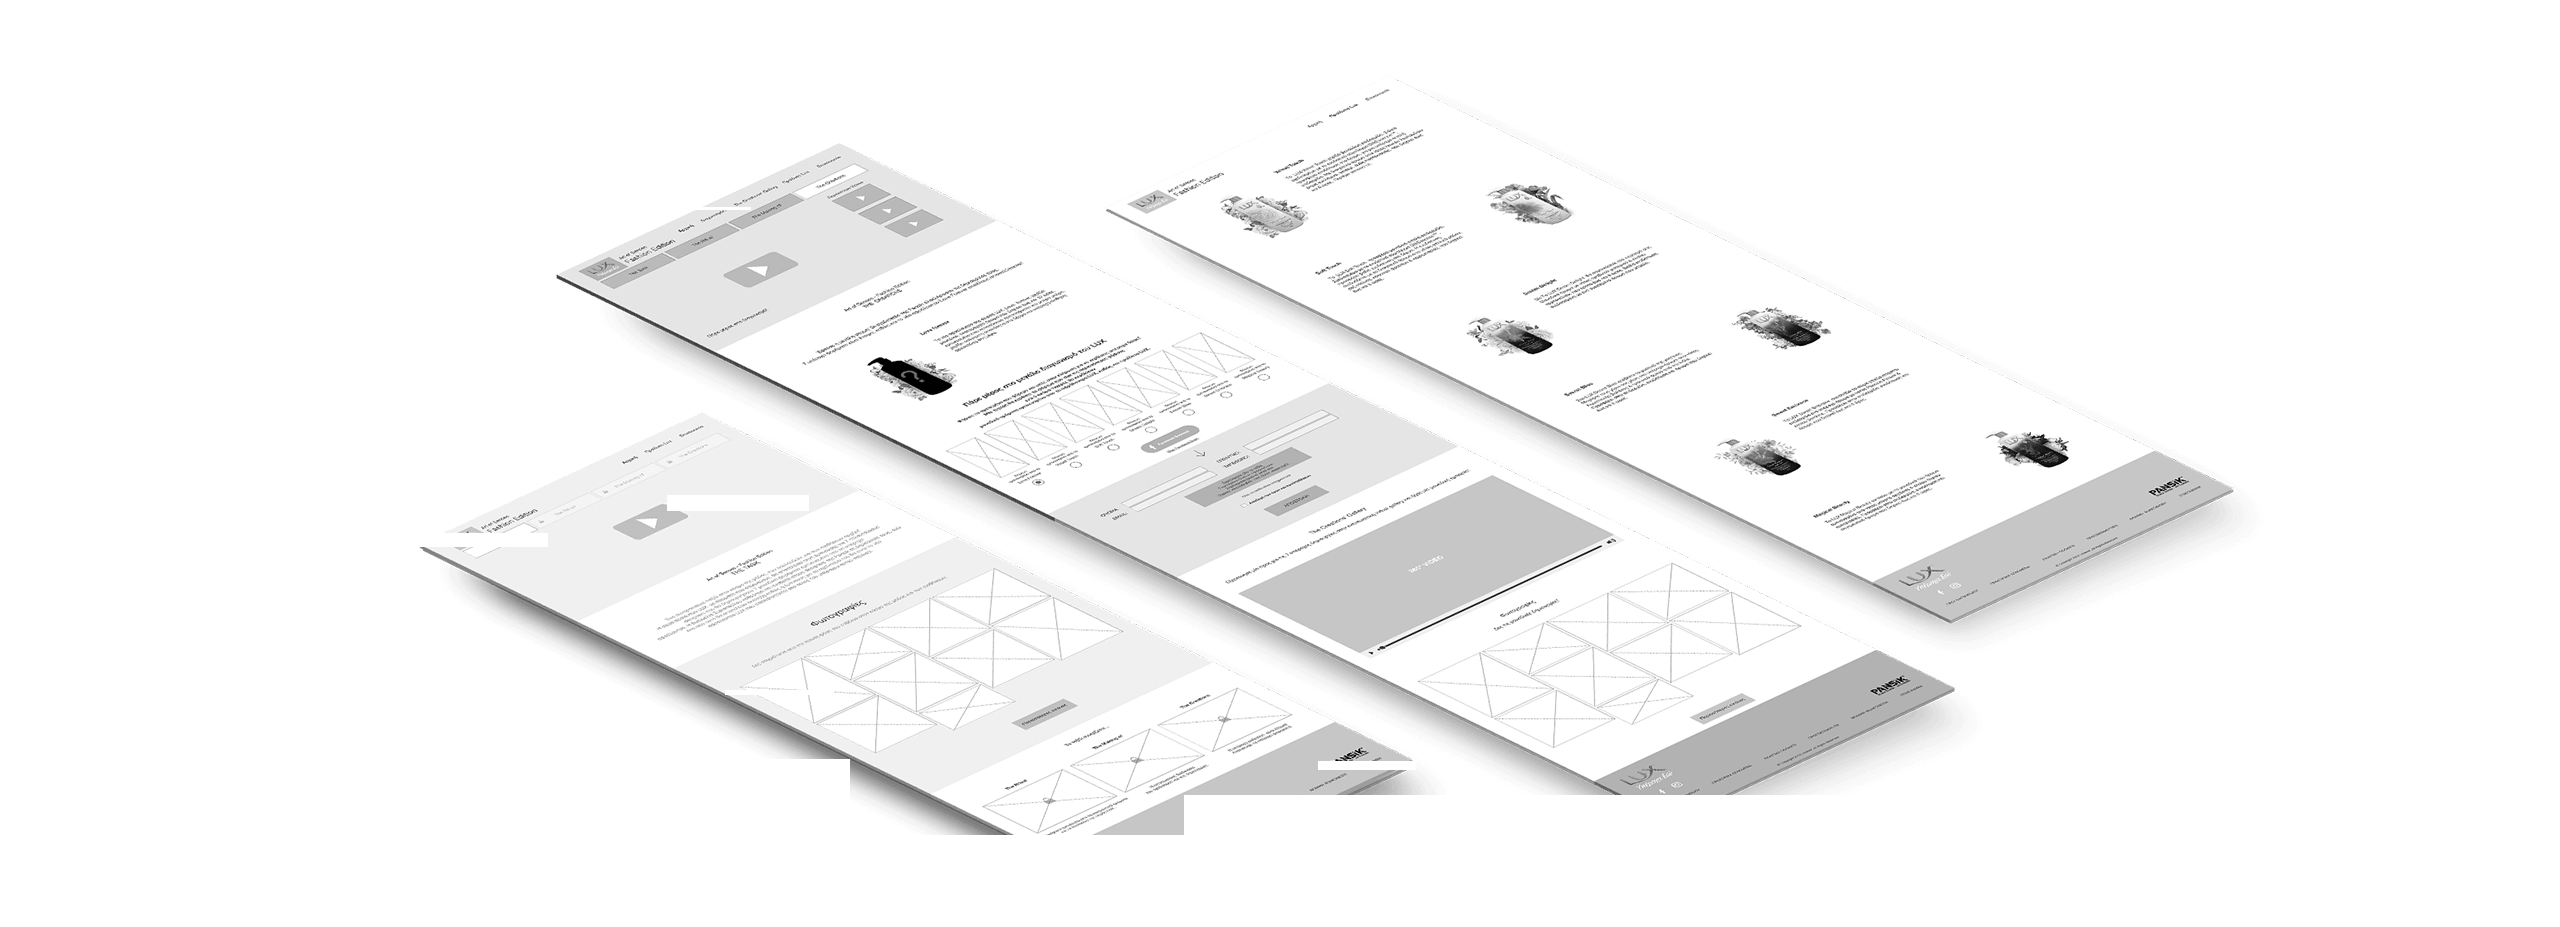 Art of Senses website wireframes. A visual guide that represents the skeletal framework of a website. 